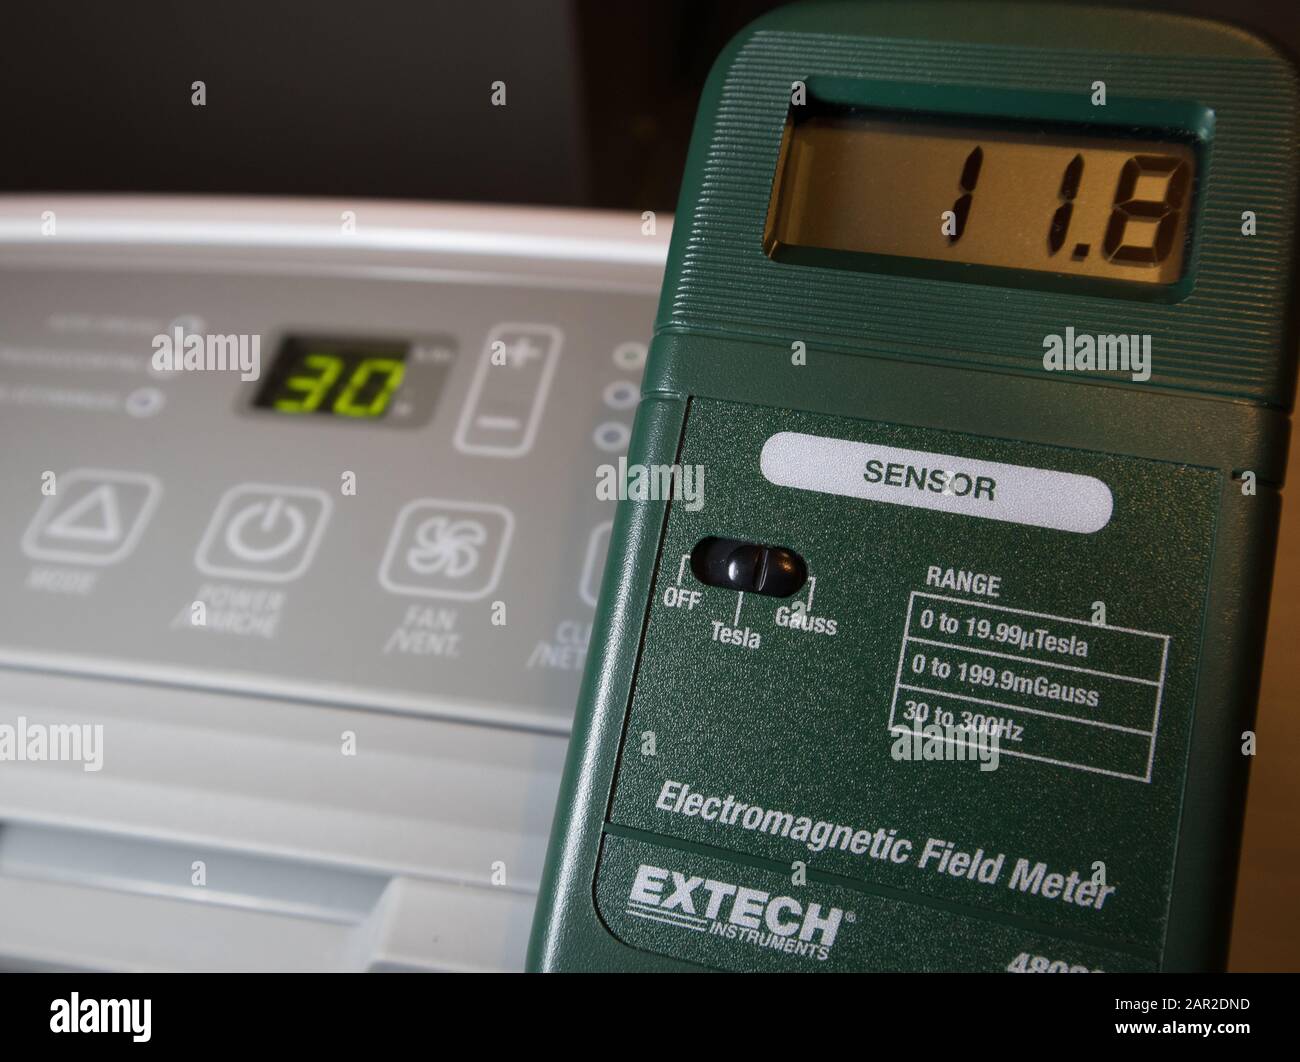 High Gauss levels measured near a dehumidifier unit for homes. Stock Photo